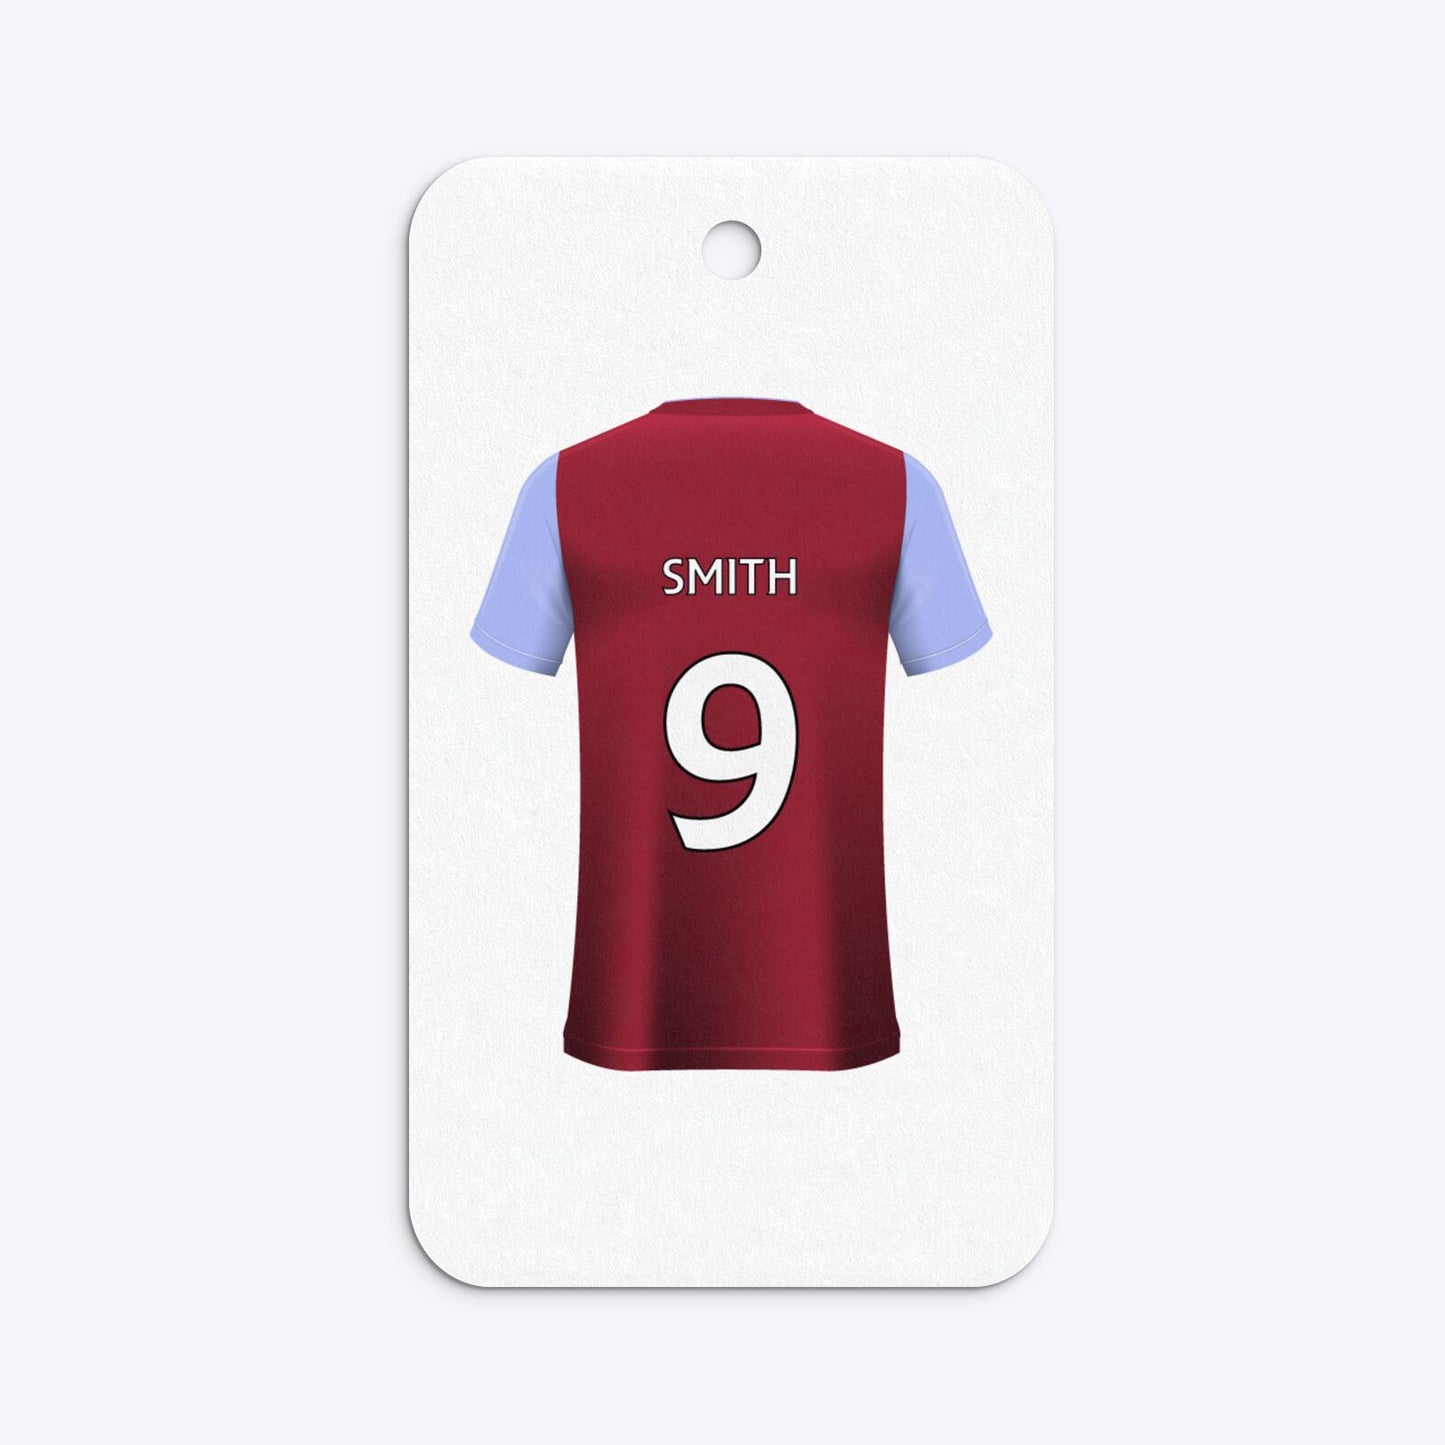 Claret and Blue Personalised Football Shirt Rounded Rectangle Gift Tag